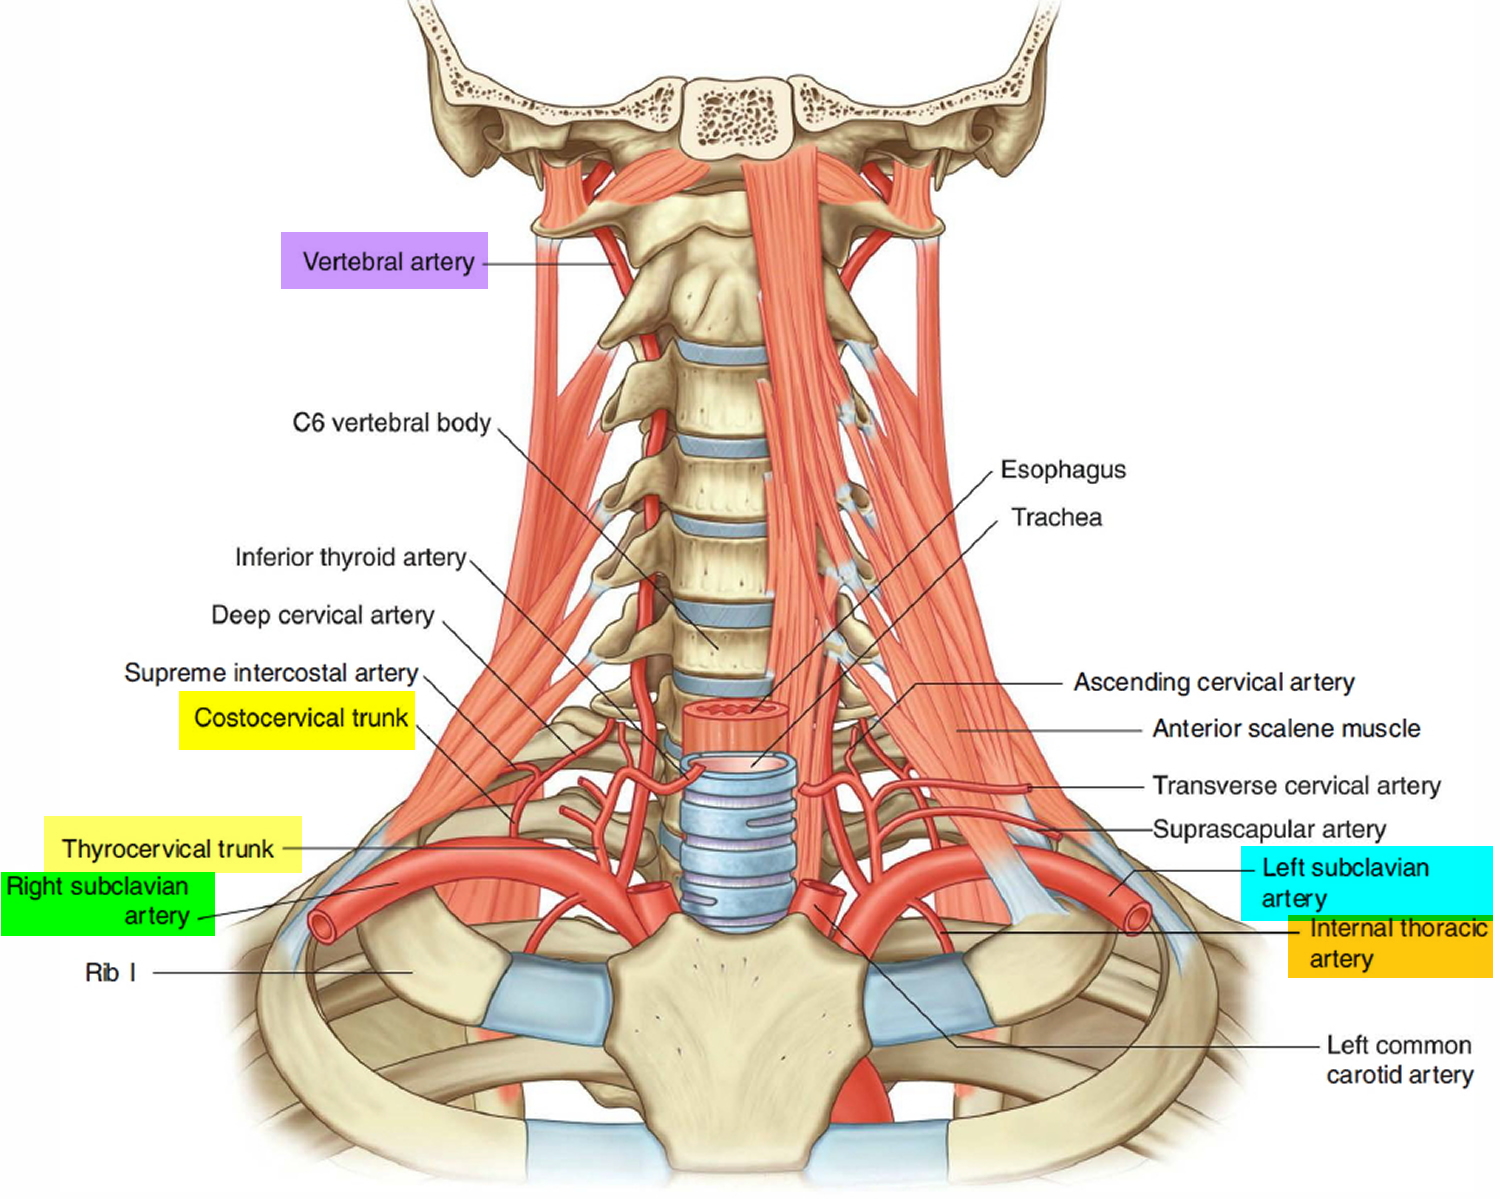 subclavian artery branches in the neck and head